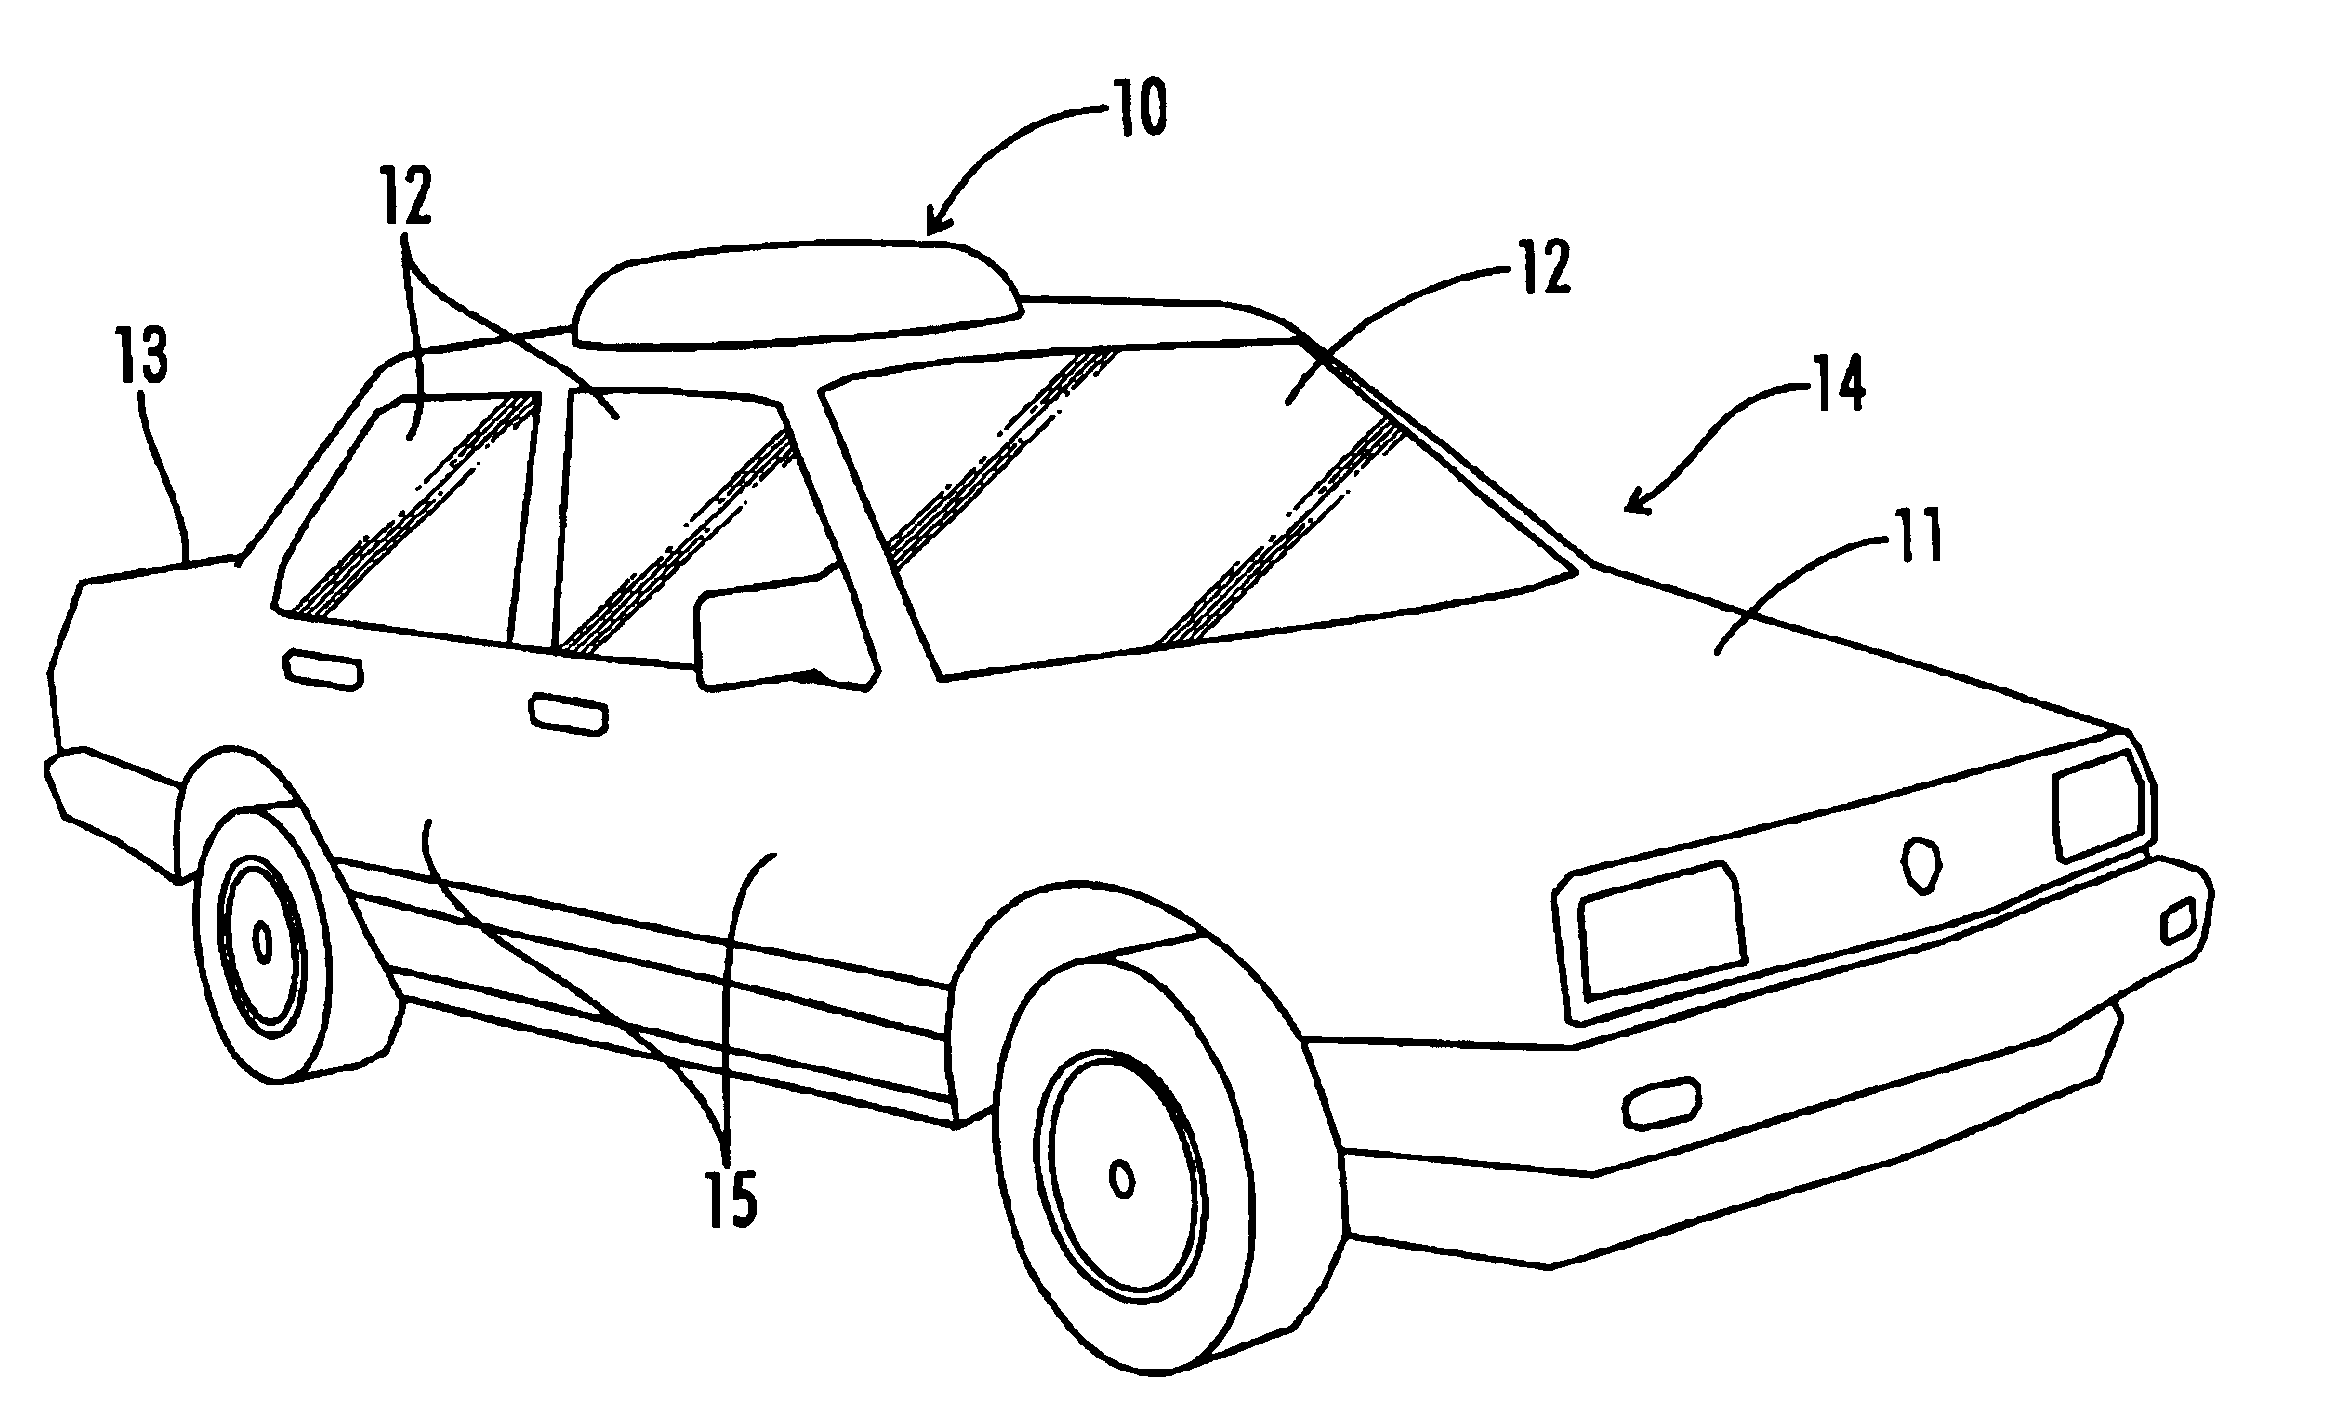 Automated covering for an automobile